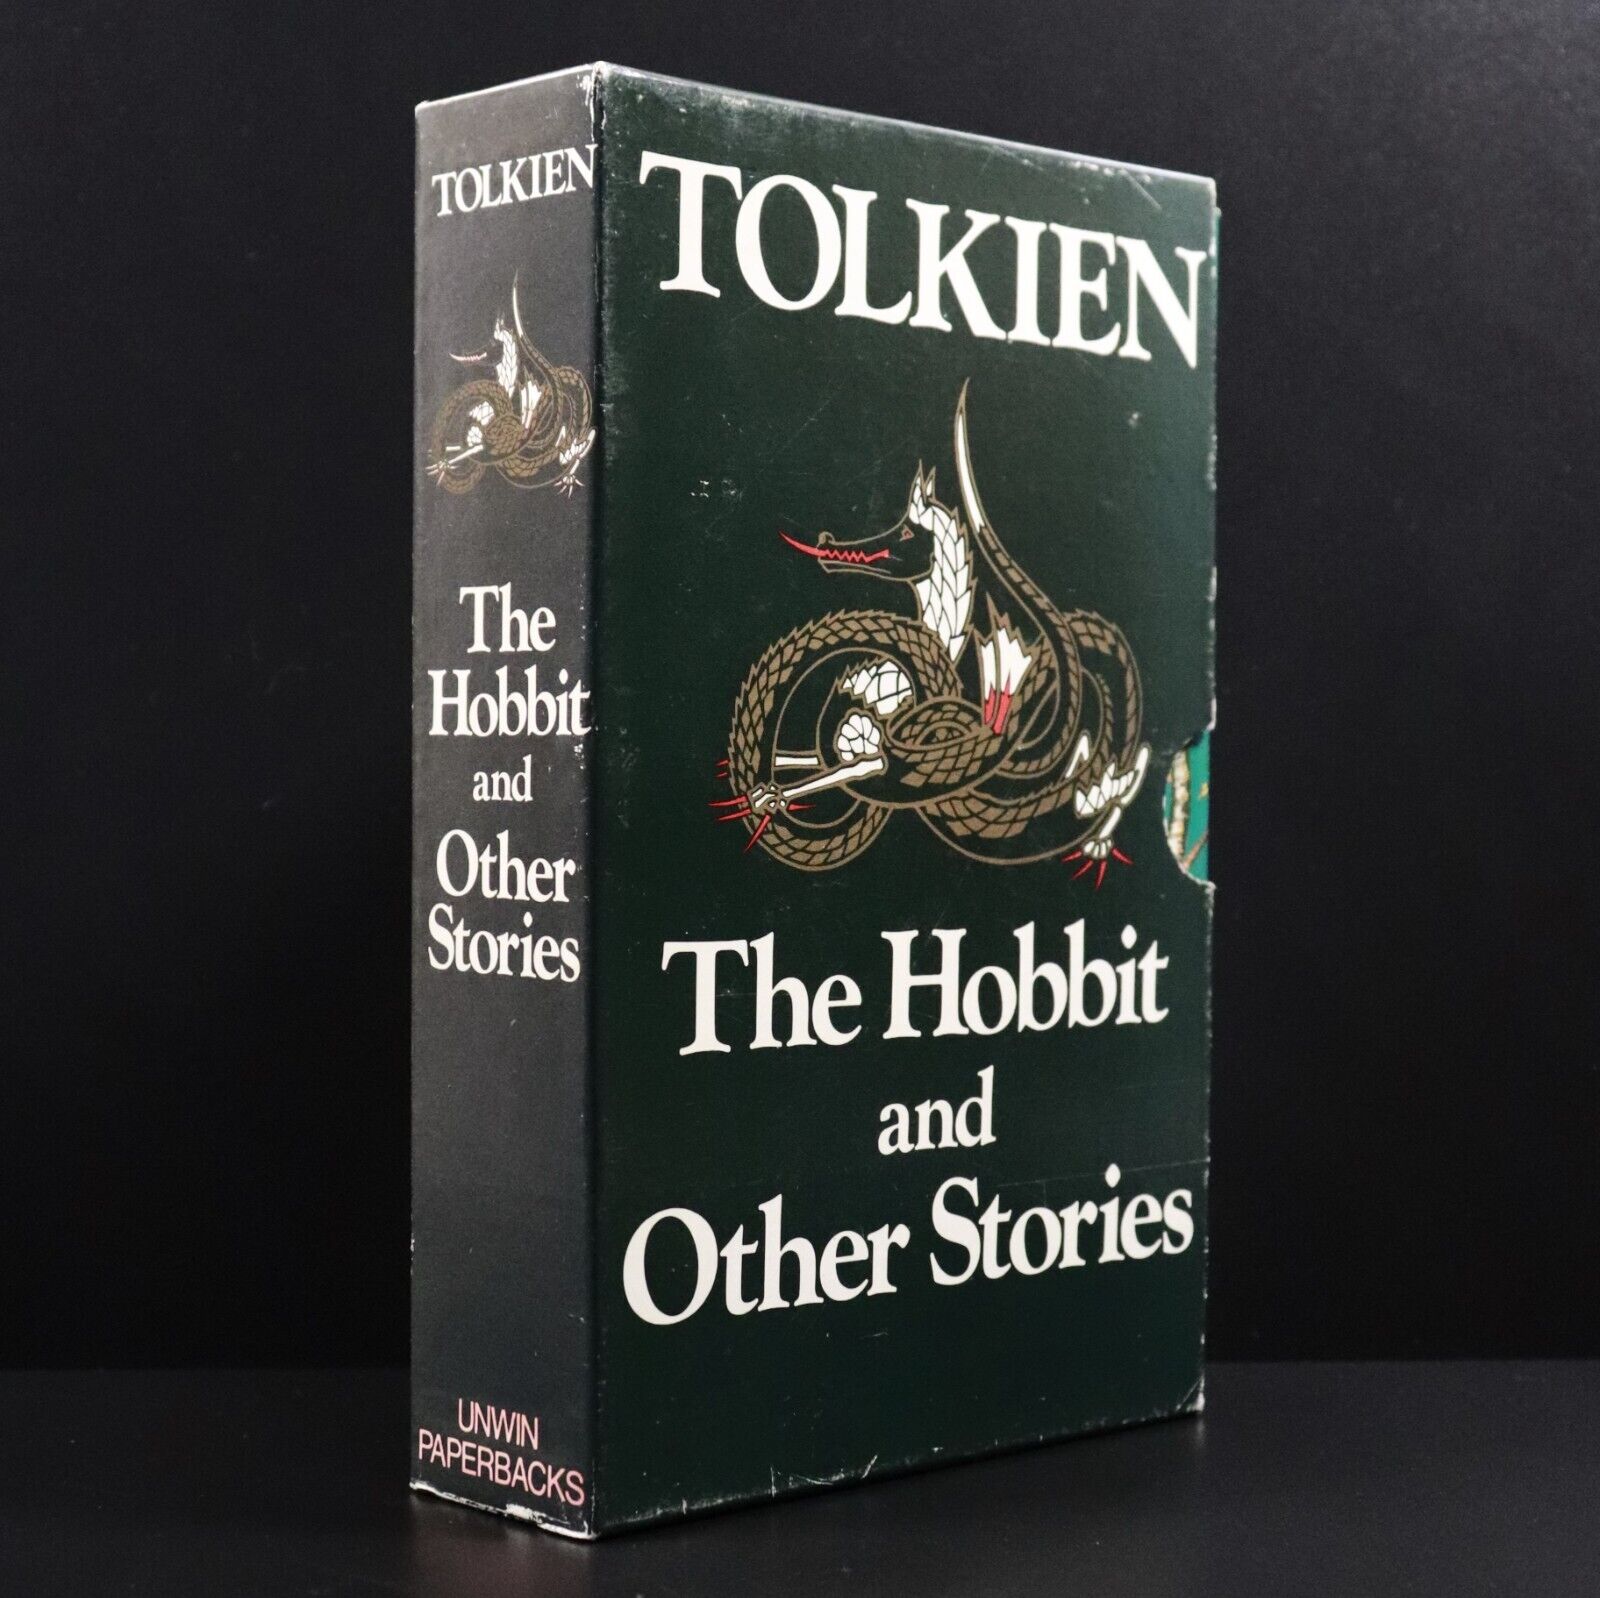 1975 3vol The Hobbit & Other Stories by J.R.R. Tolkien Fantasy Fiction Book Set